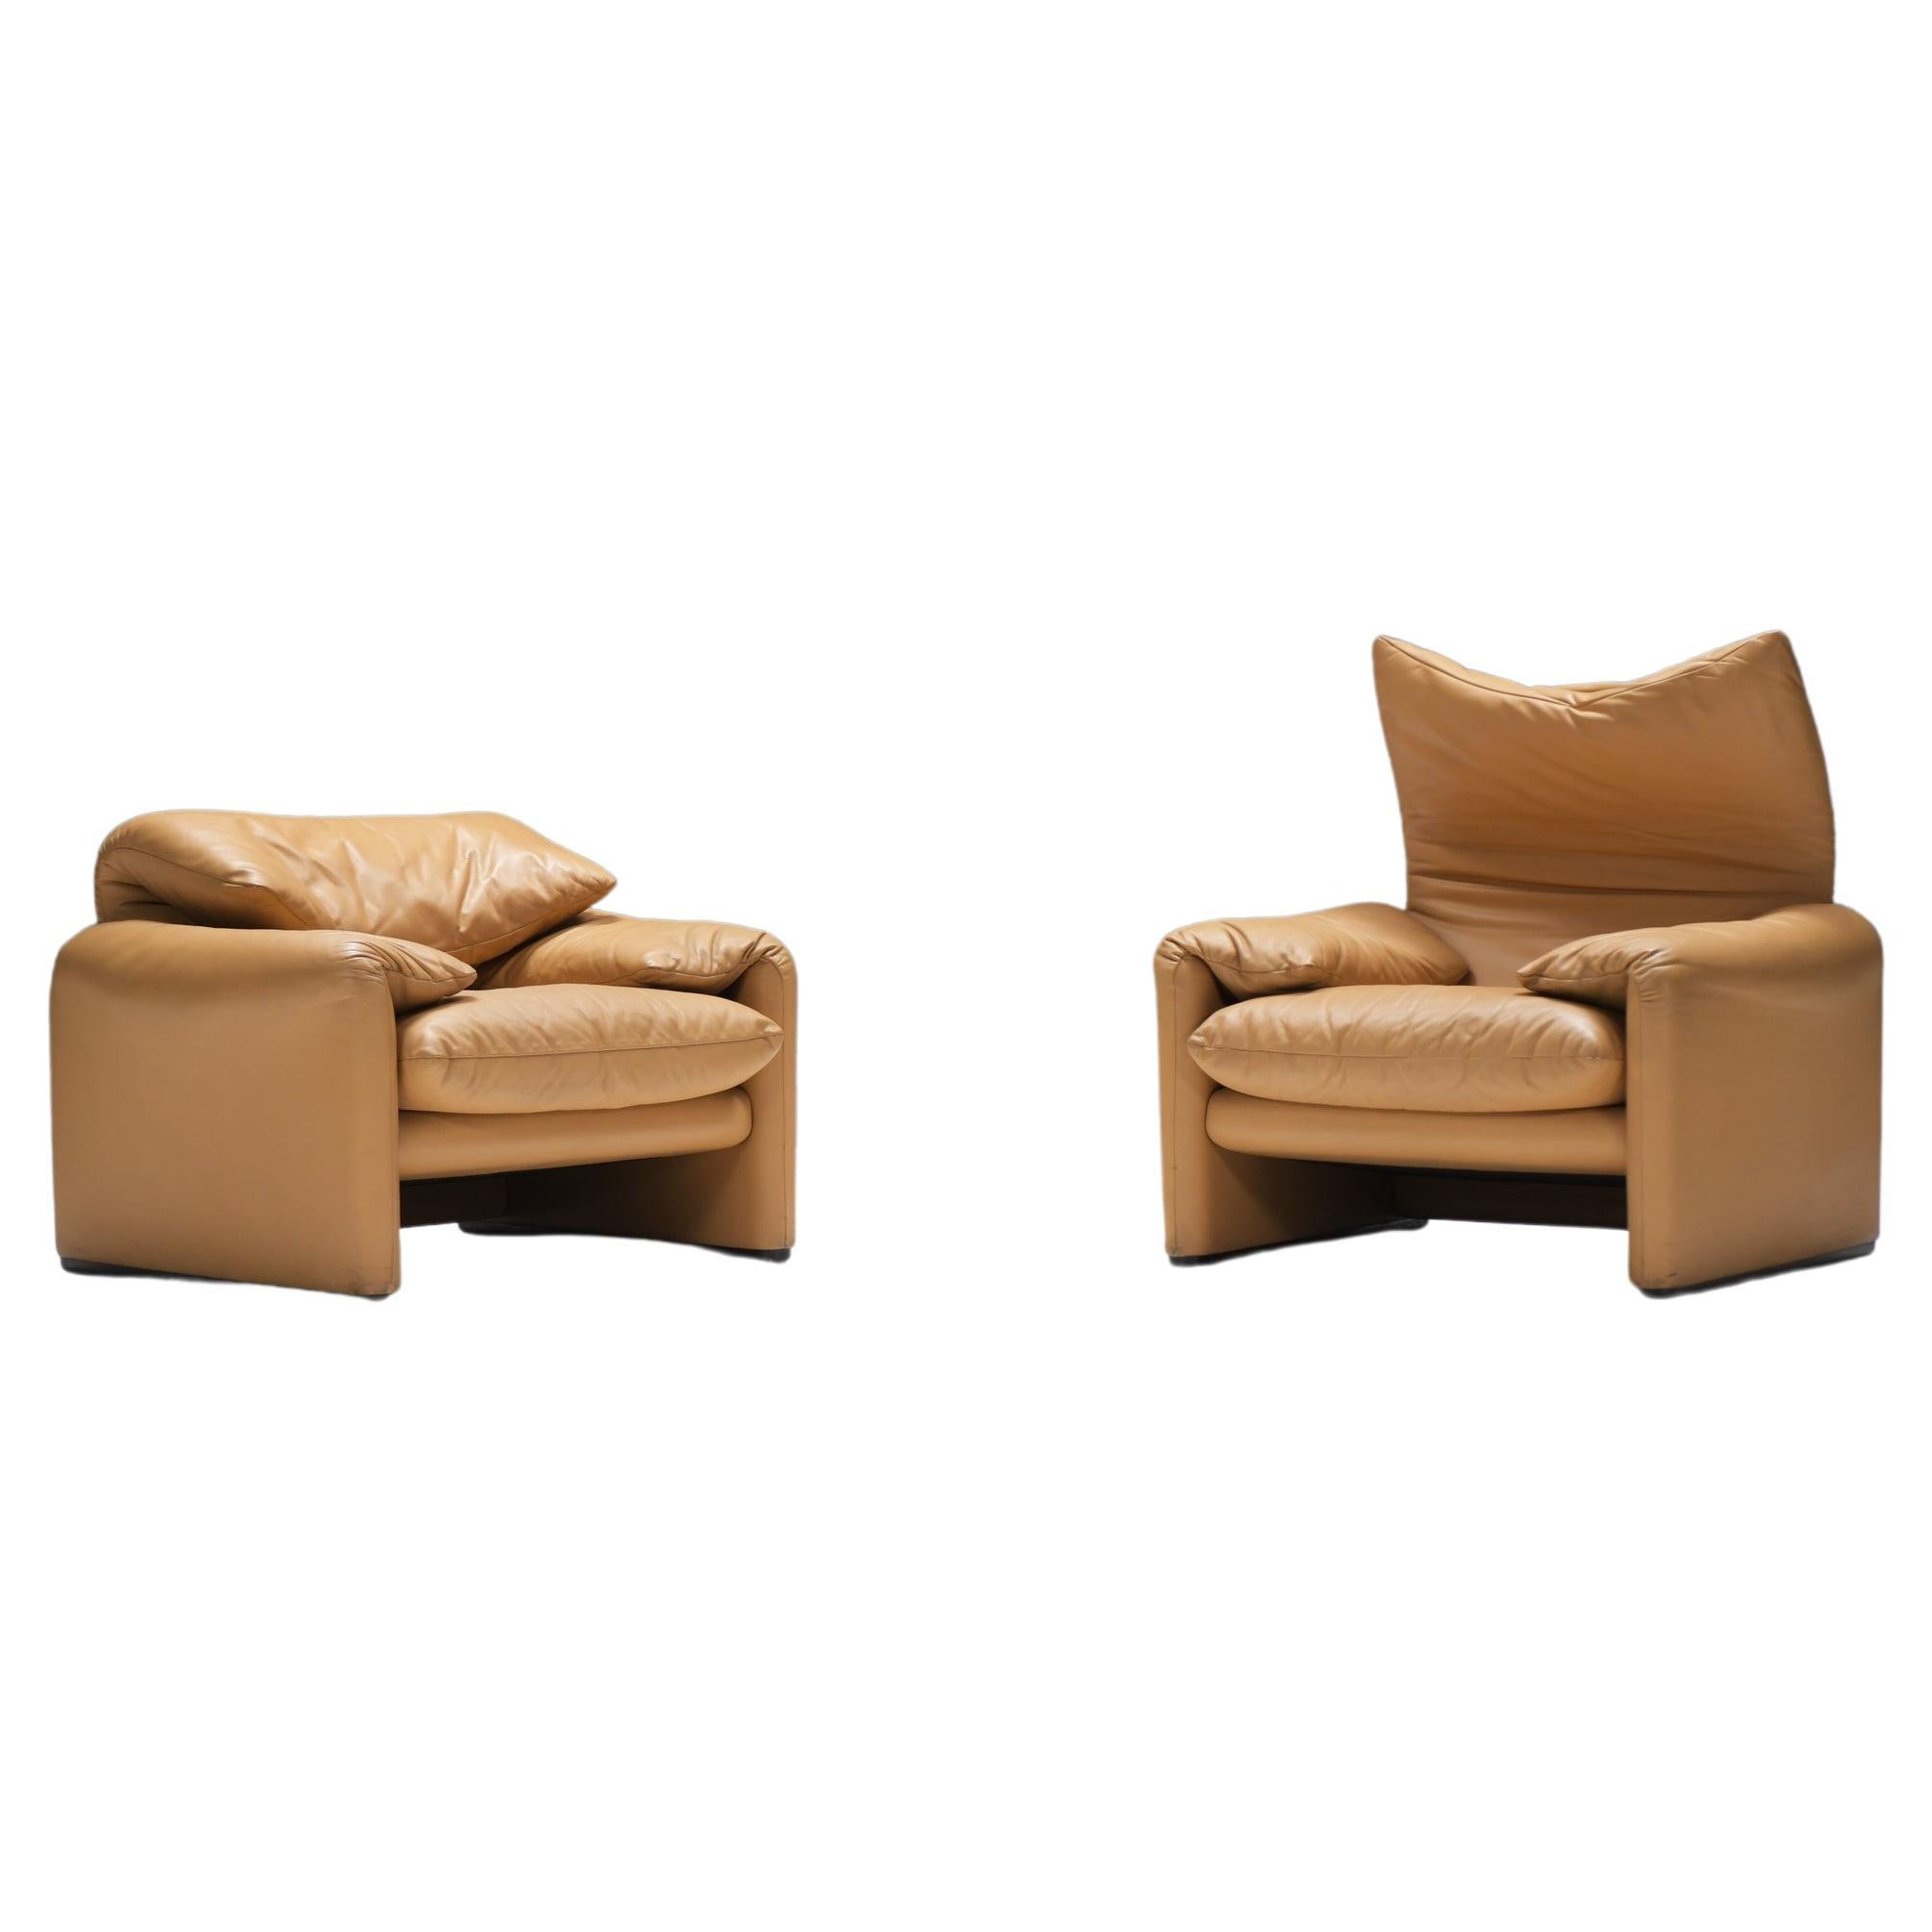 Set of matching Maralunga's in original leather by Vico Magistretti for Cassina